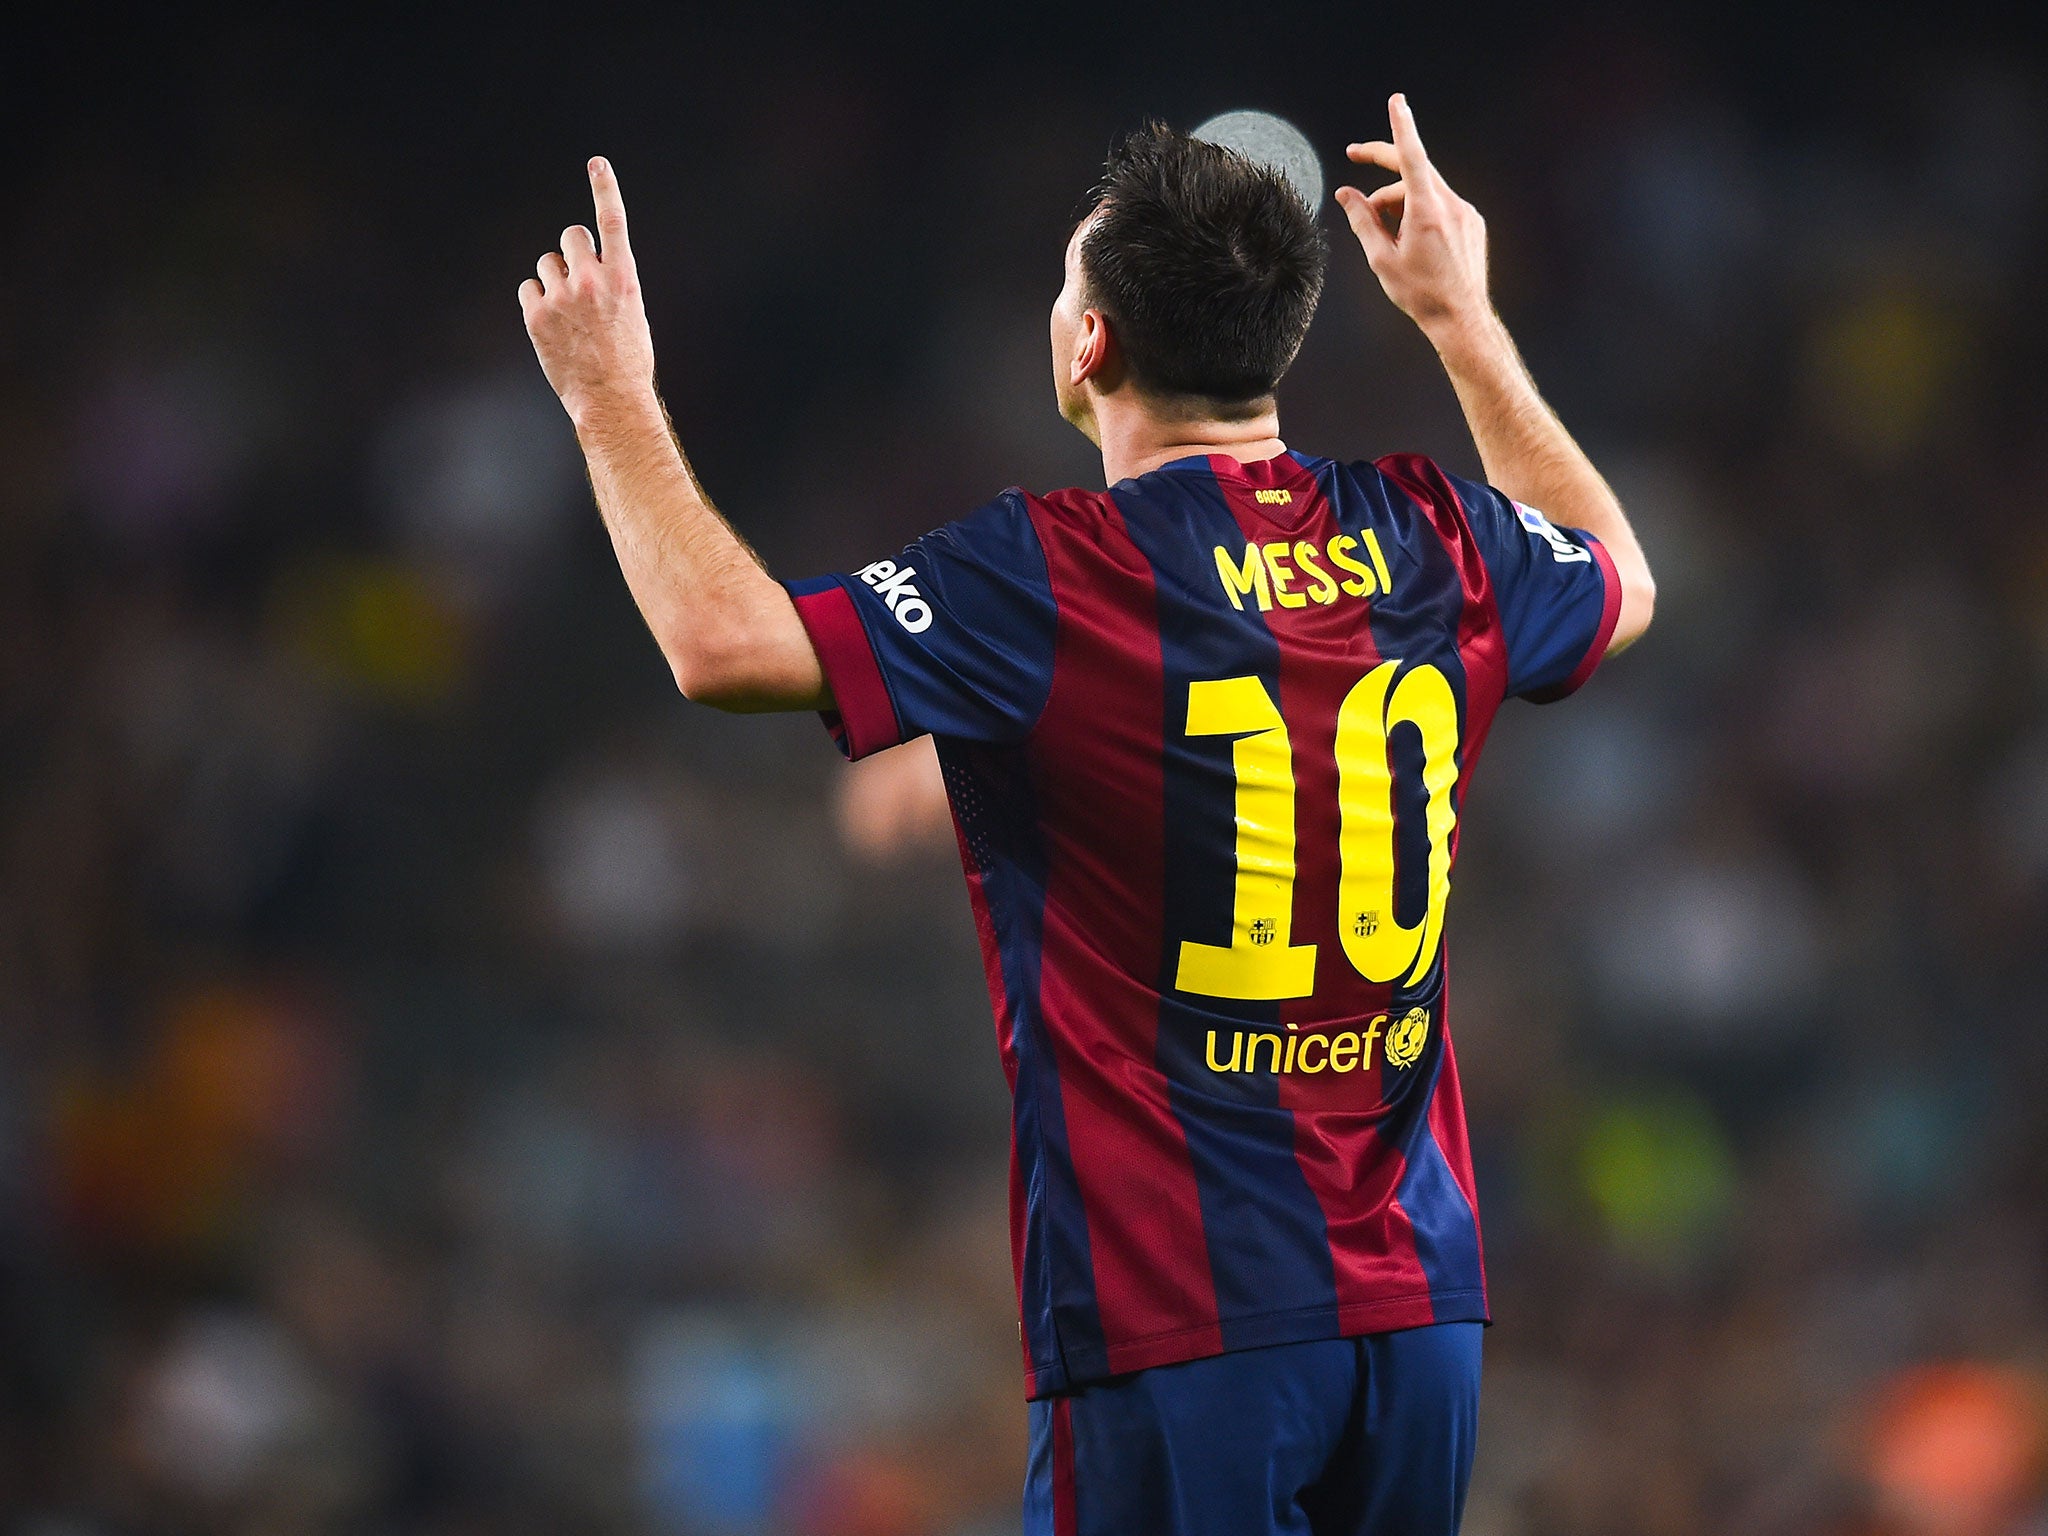 Lionel Messi will be among the players on show